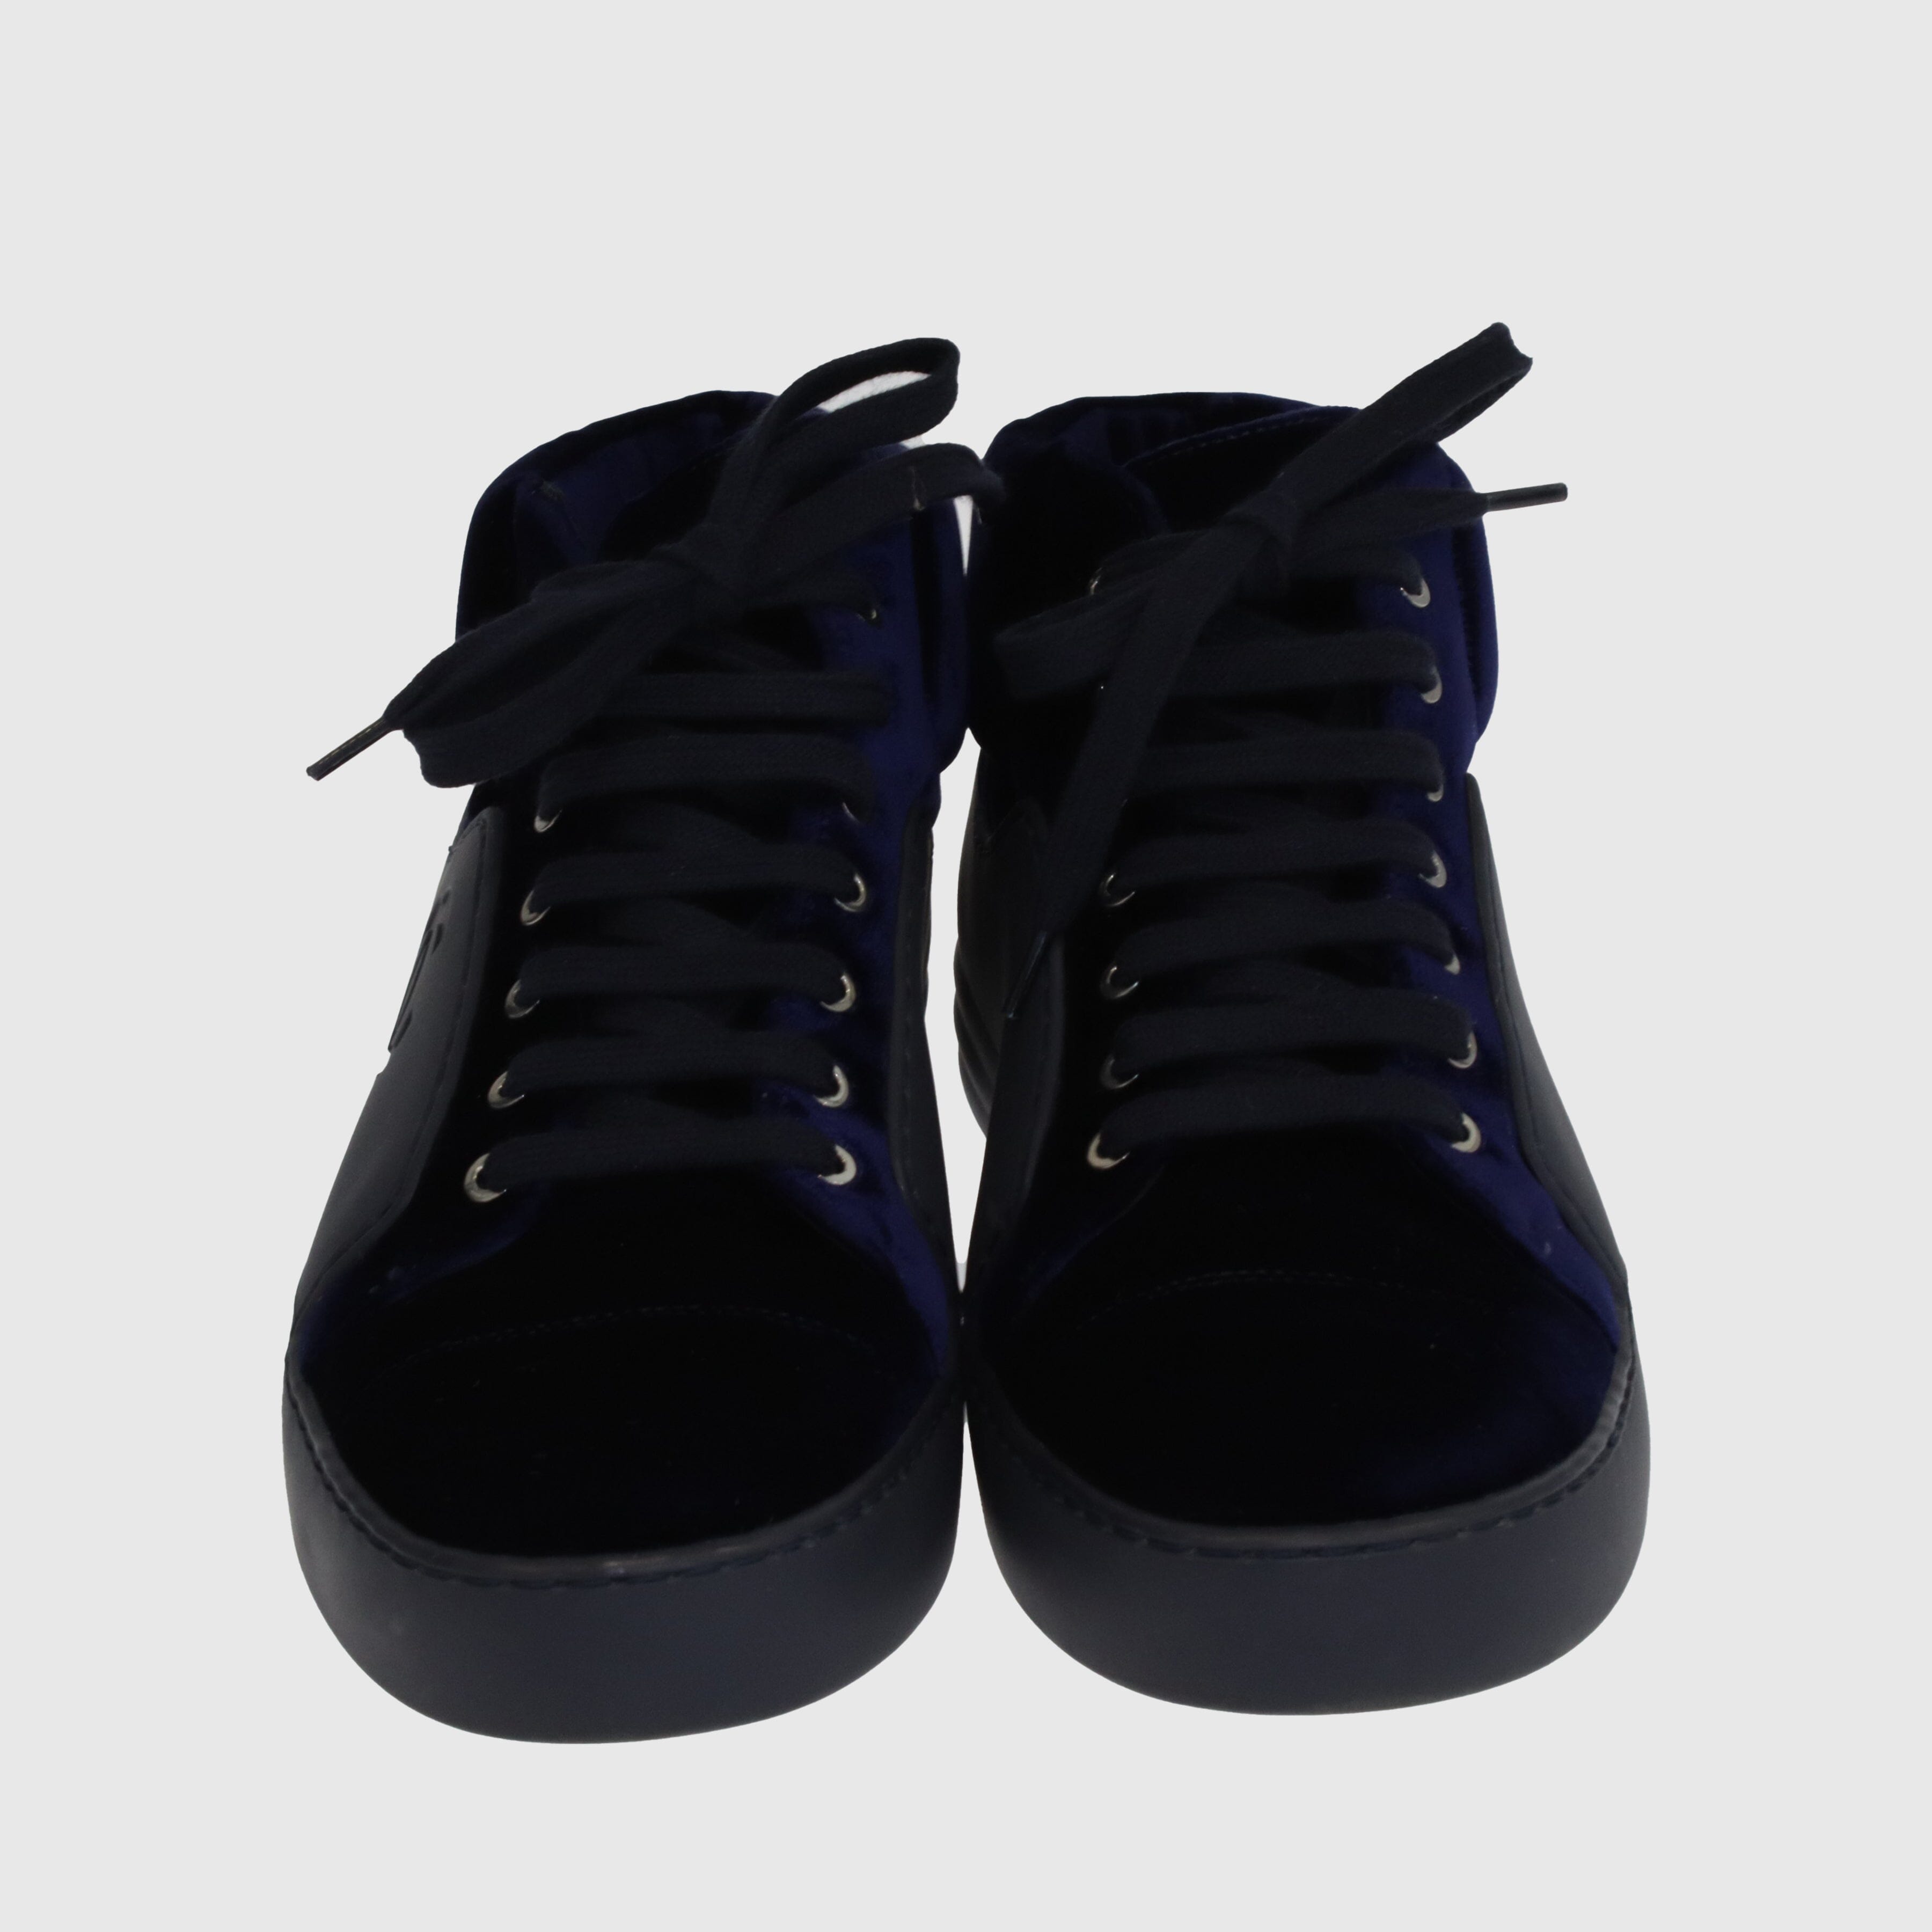 Navy Blue CC High Top Sneakers Shoes Chanel